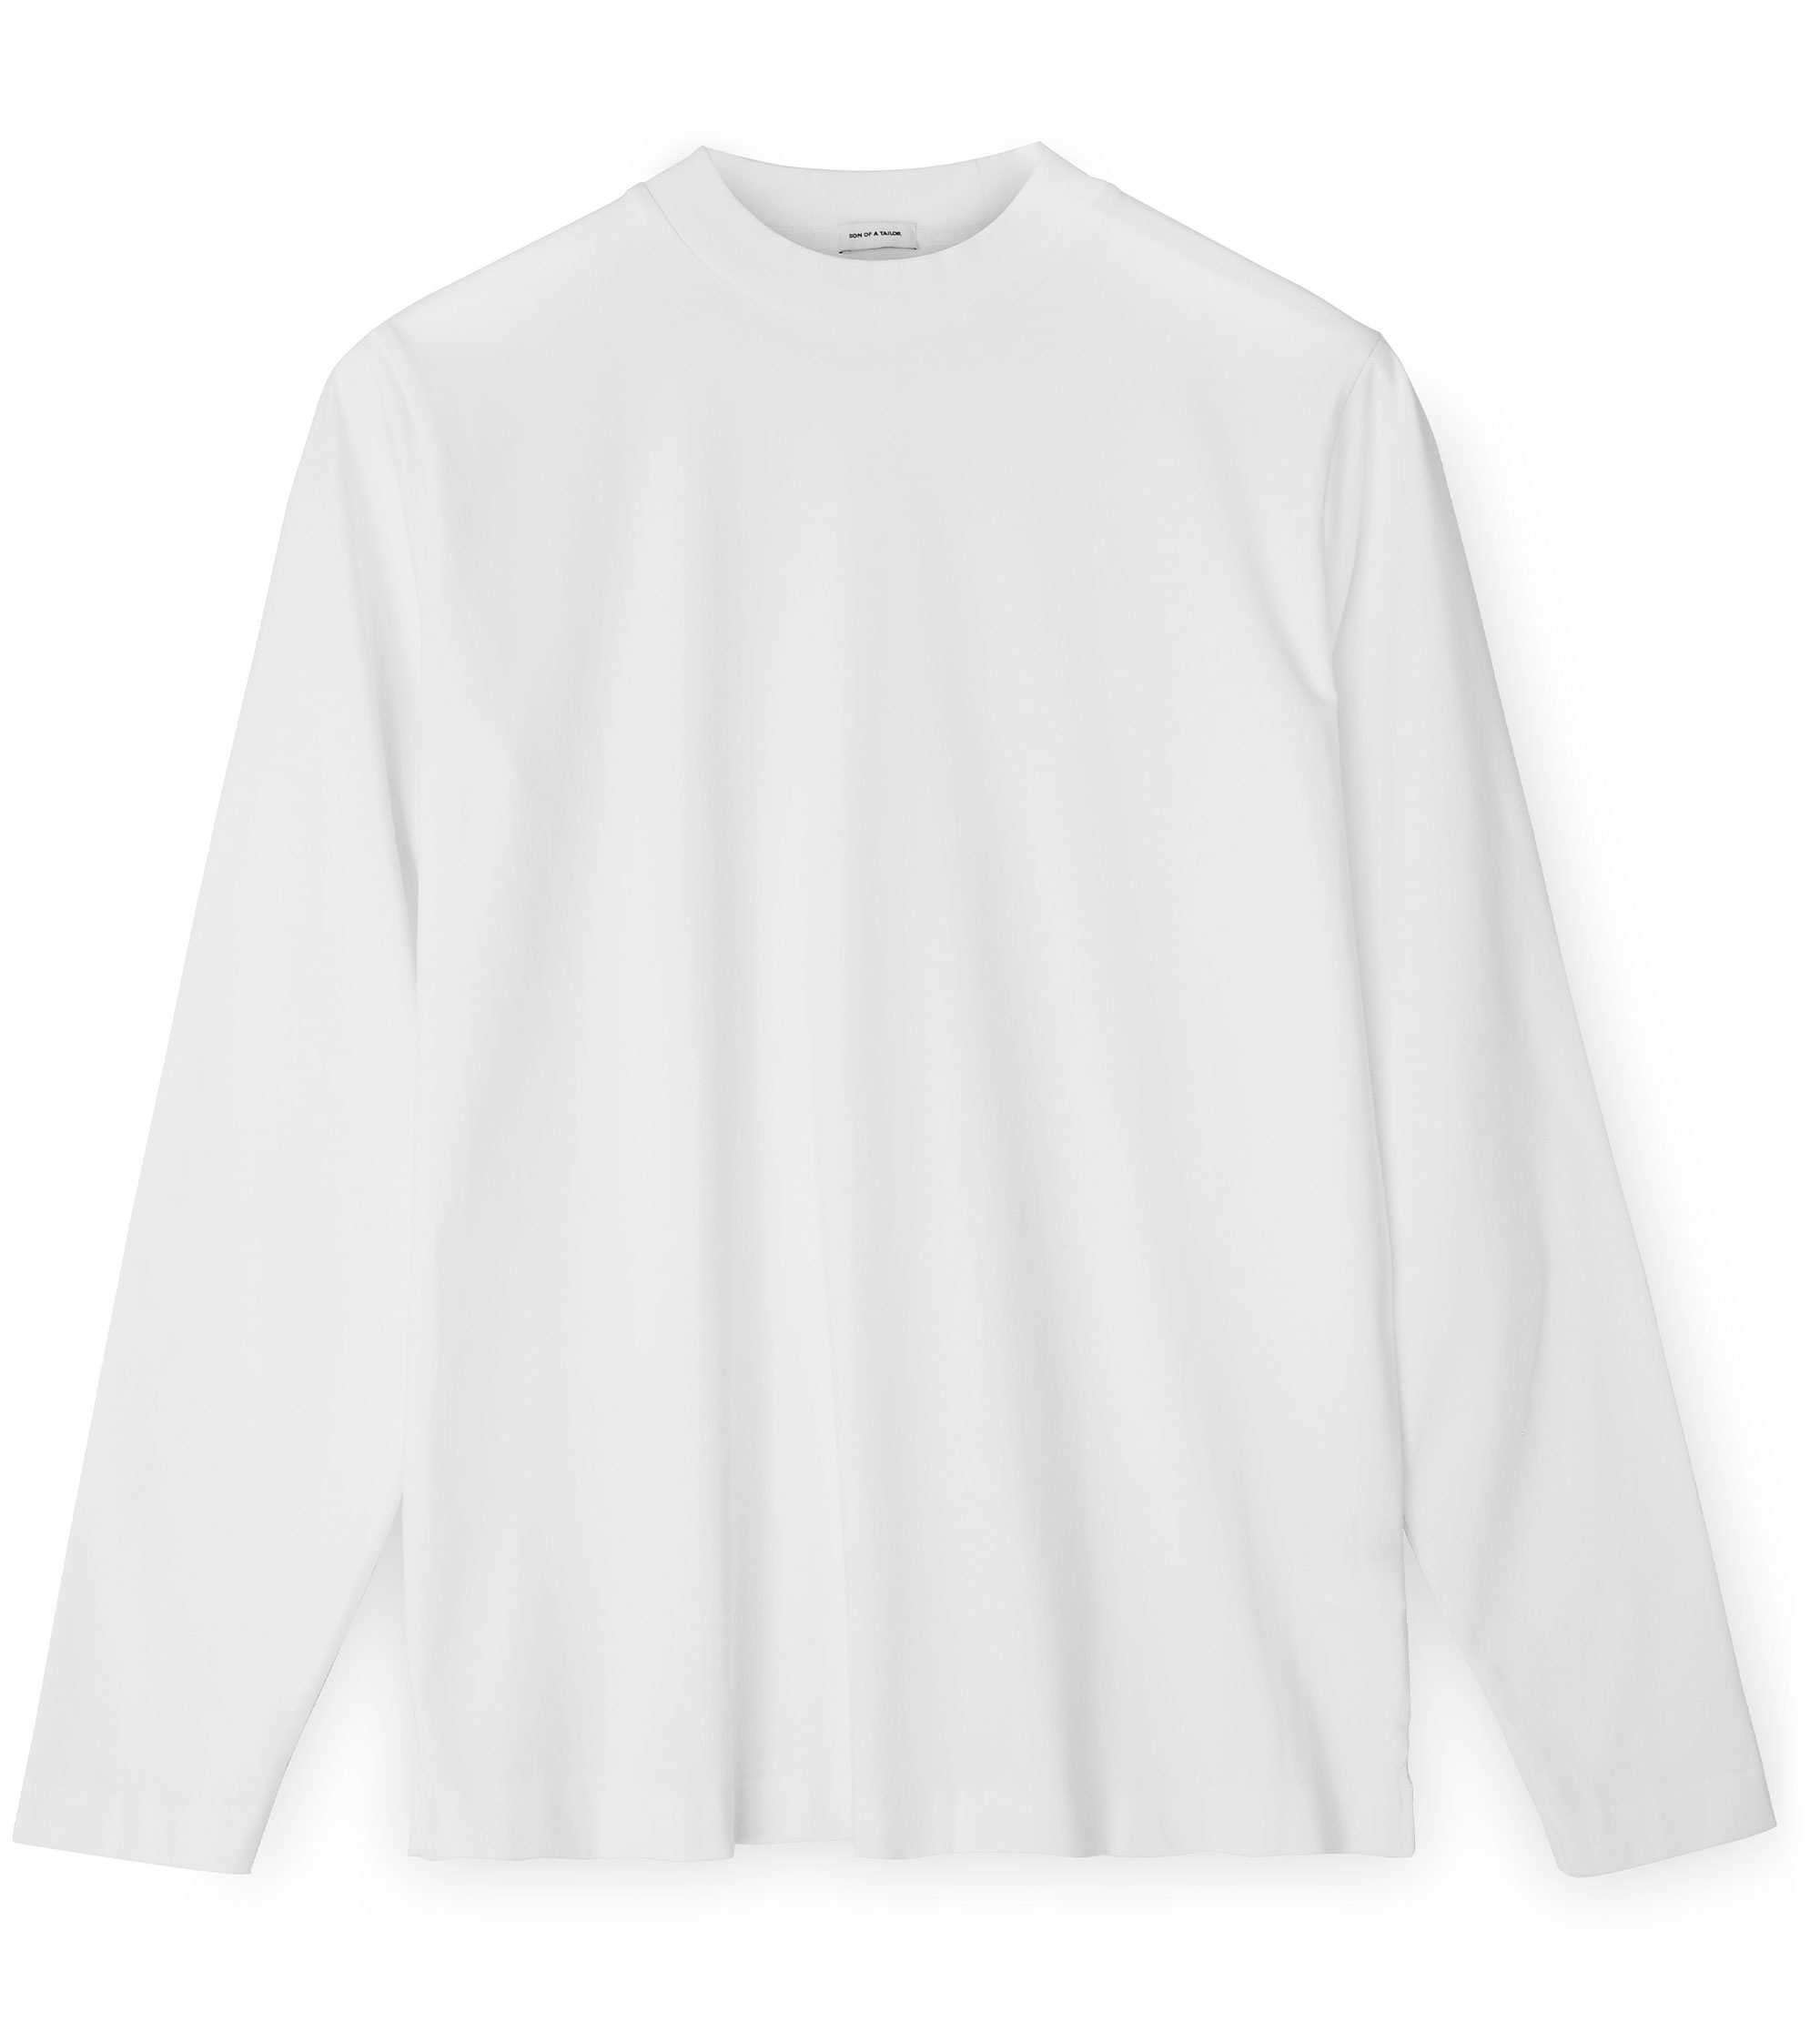 Custom Fitted Cotton Hi-Neck / Long-Sleeve White